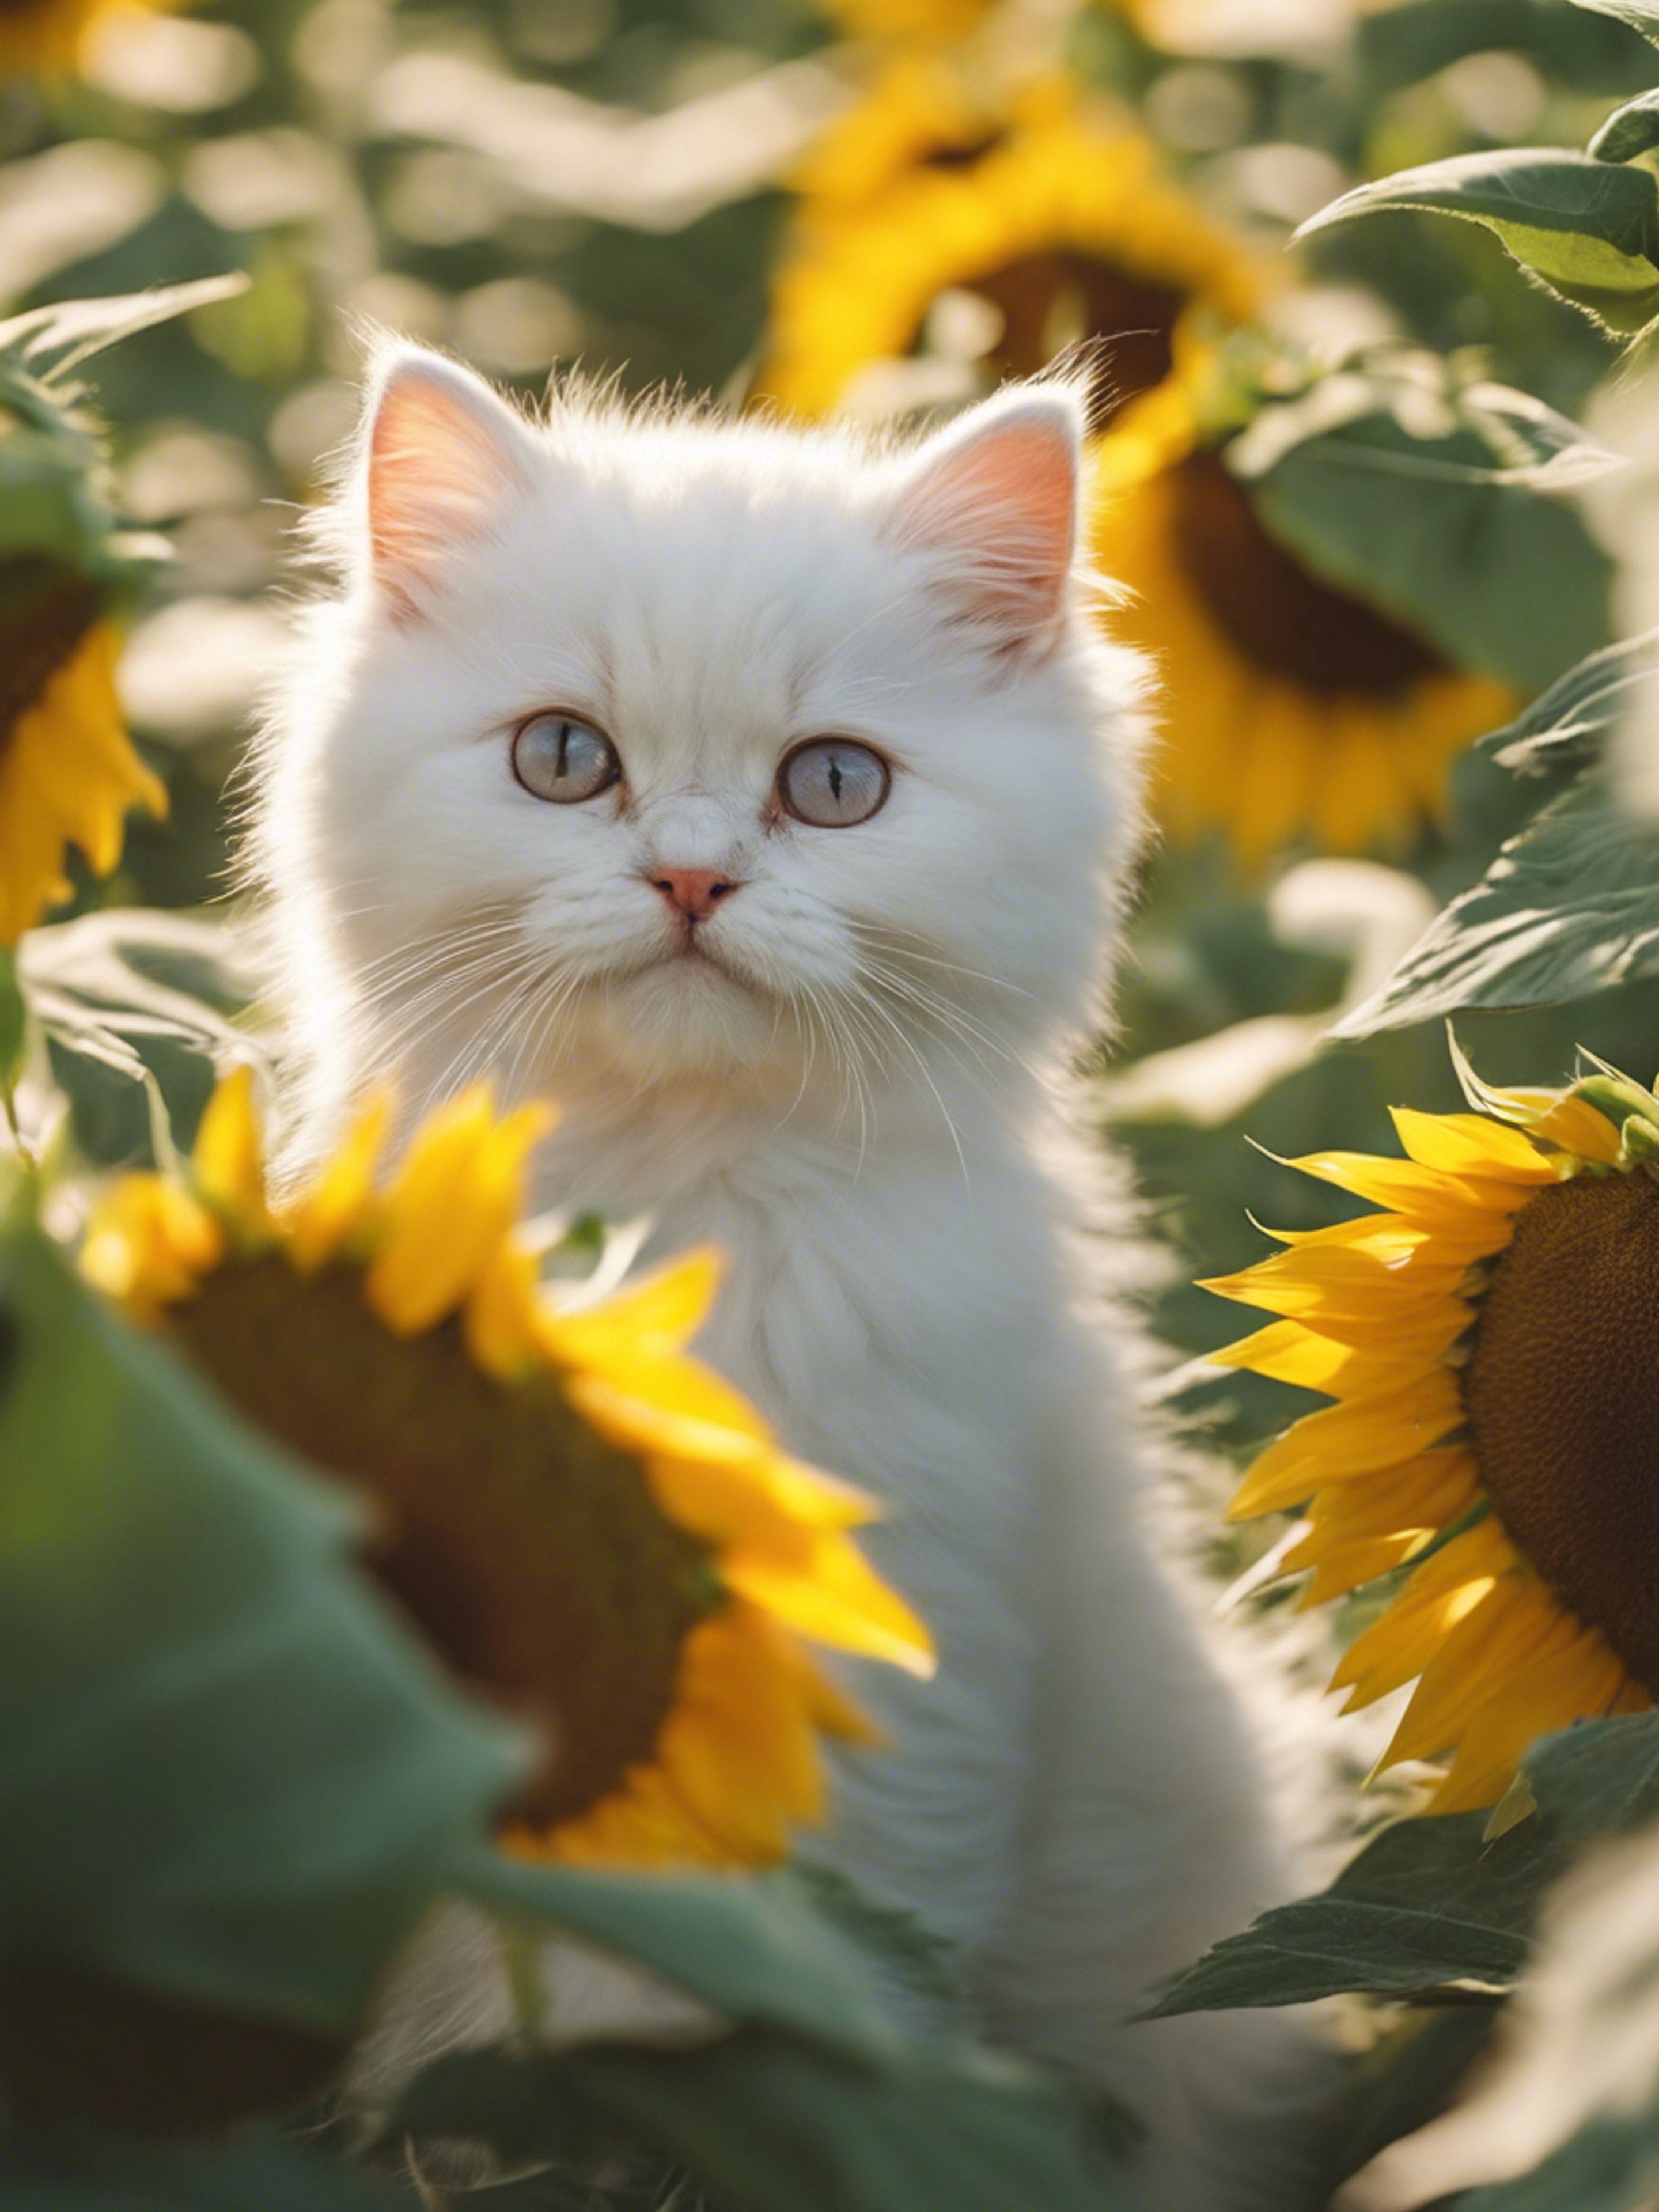 A snow-white Persian kitten playing peek-a-boo among a field of sunflowers on a bright, sunny day. Тапет[783f0584fefb42ff9955]